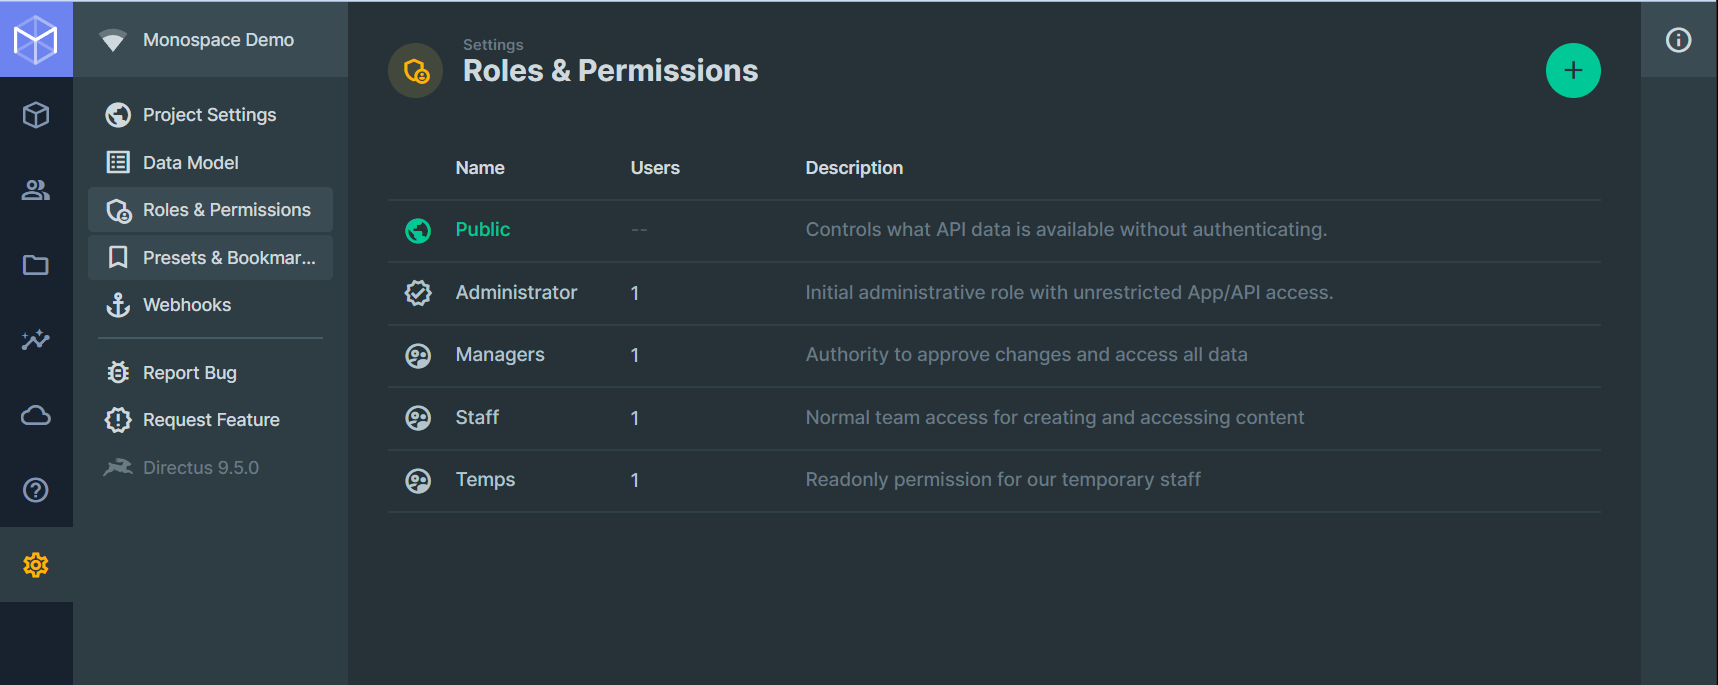 Directus Roles and Permissions